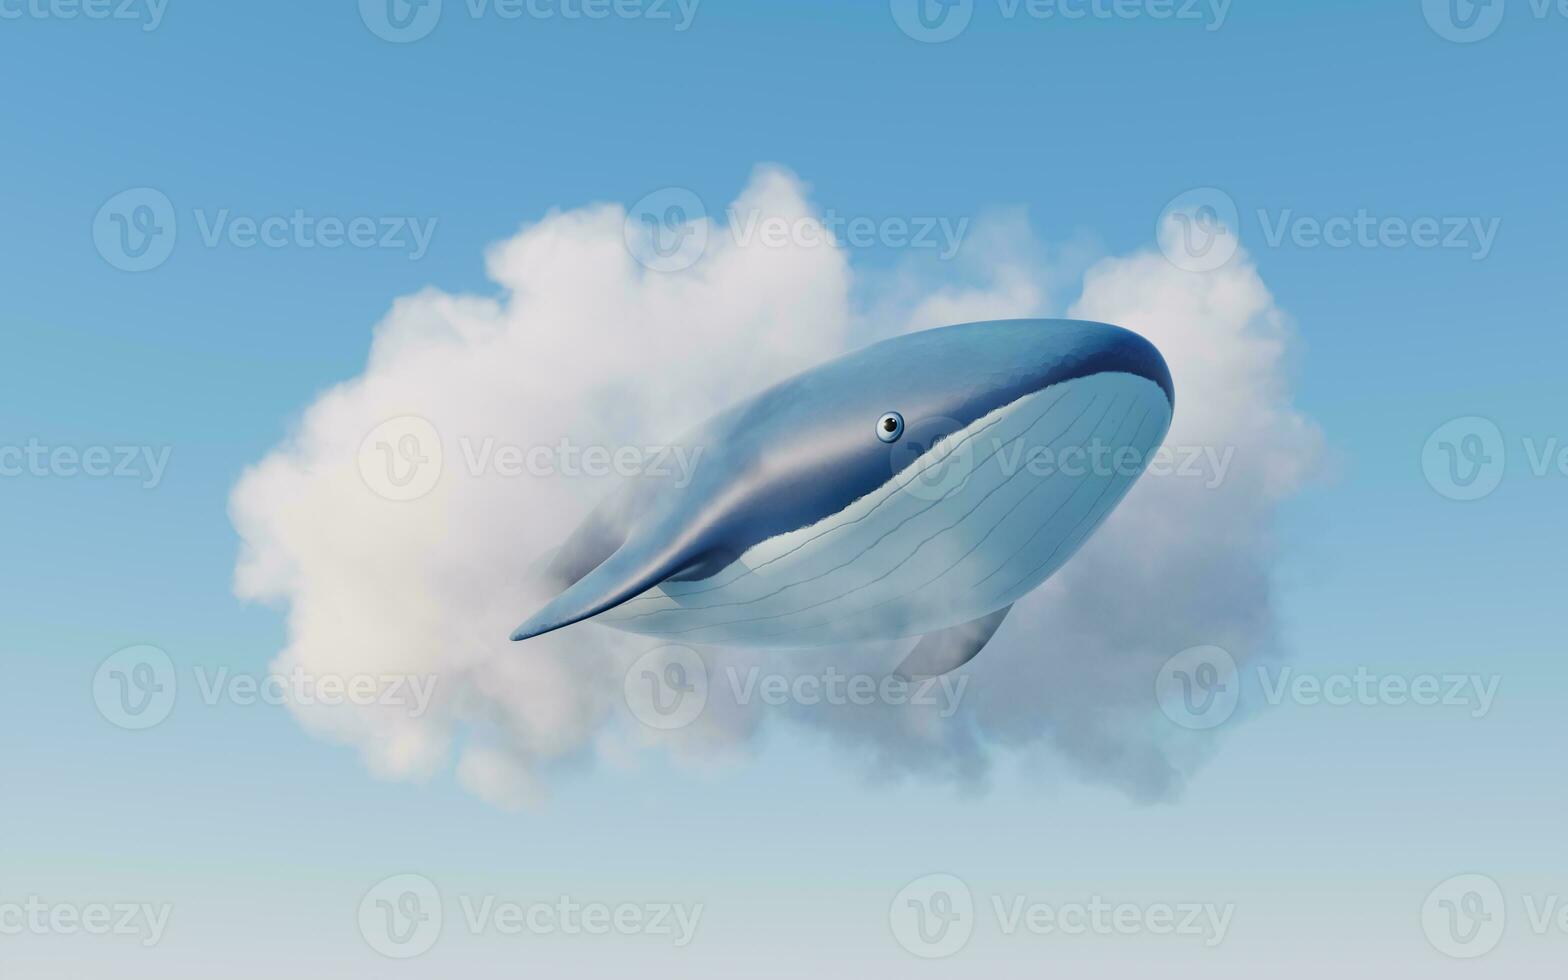 Whale with cartoon style, 3d rendering. photo